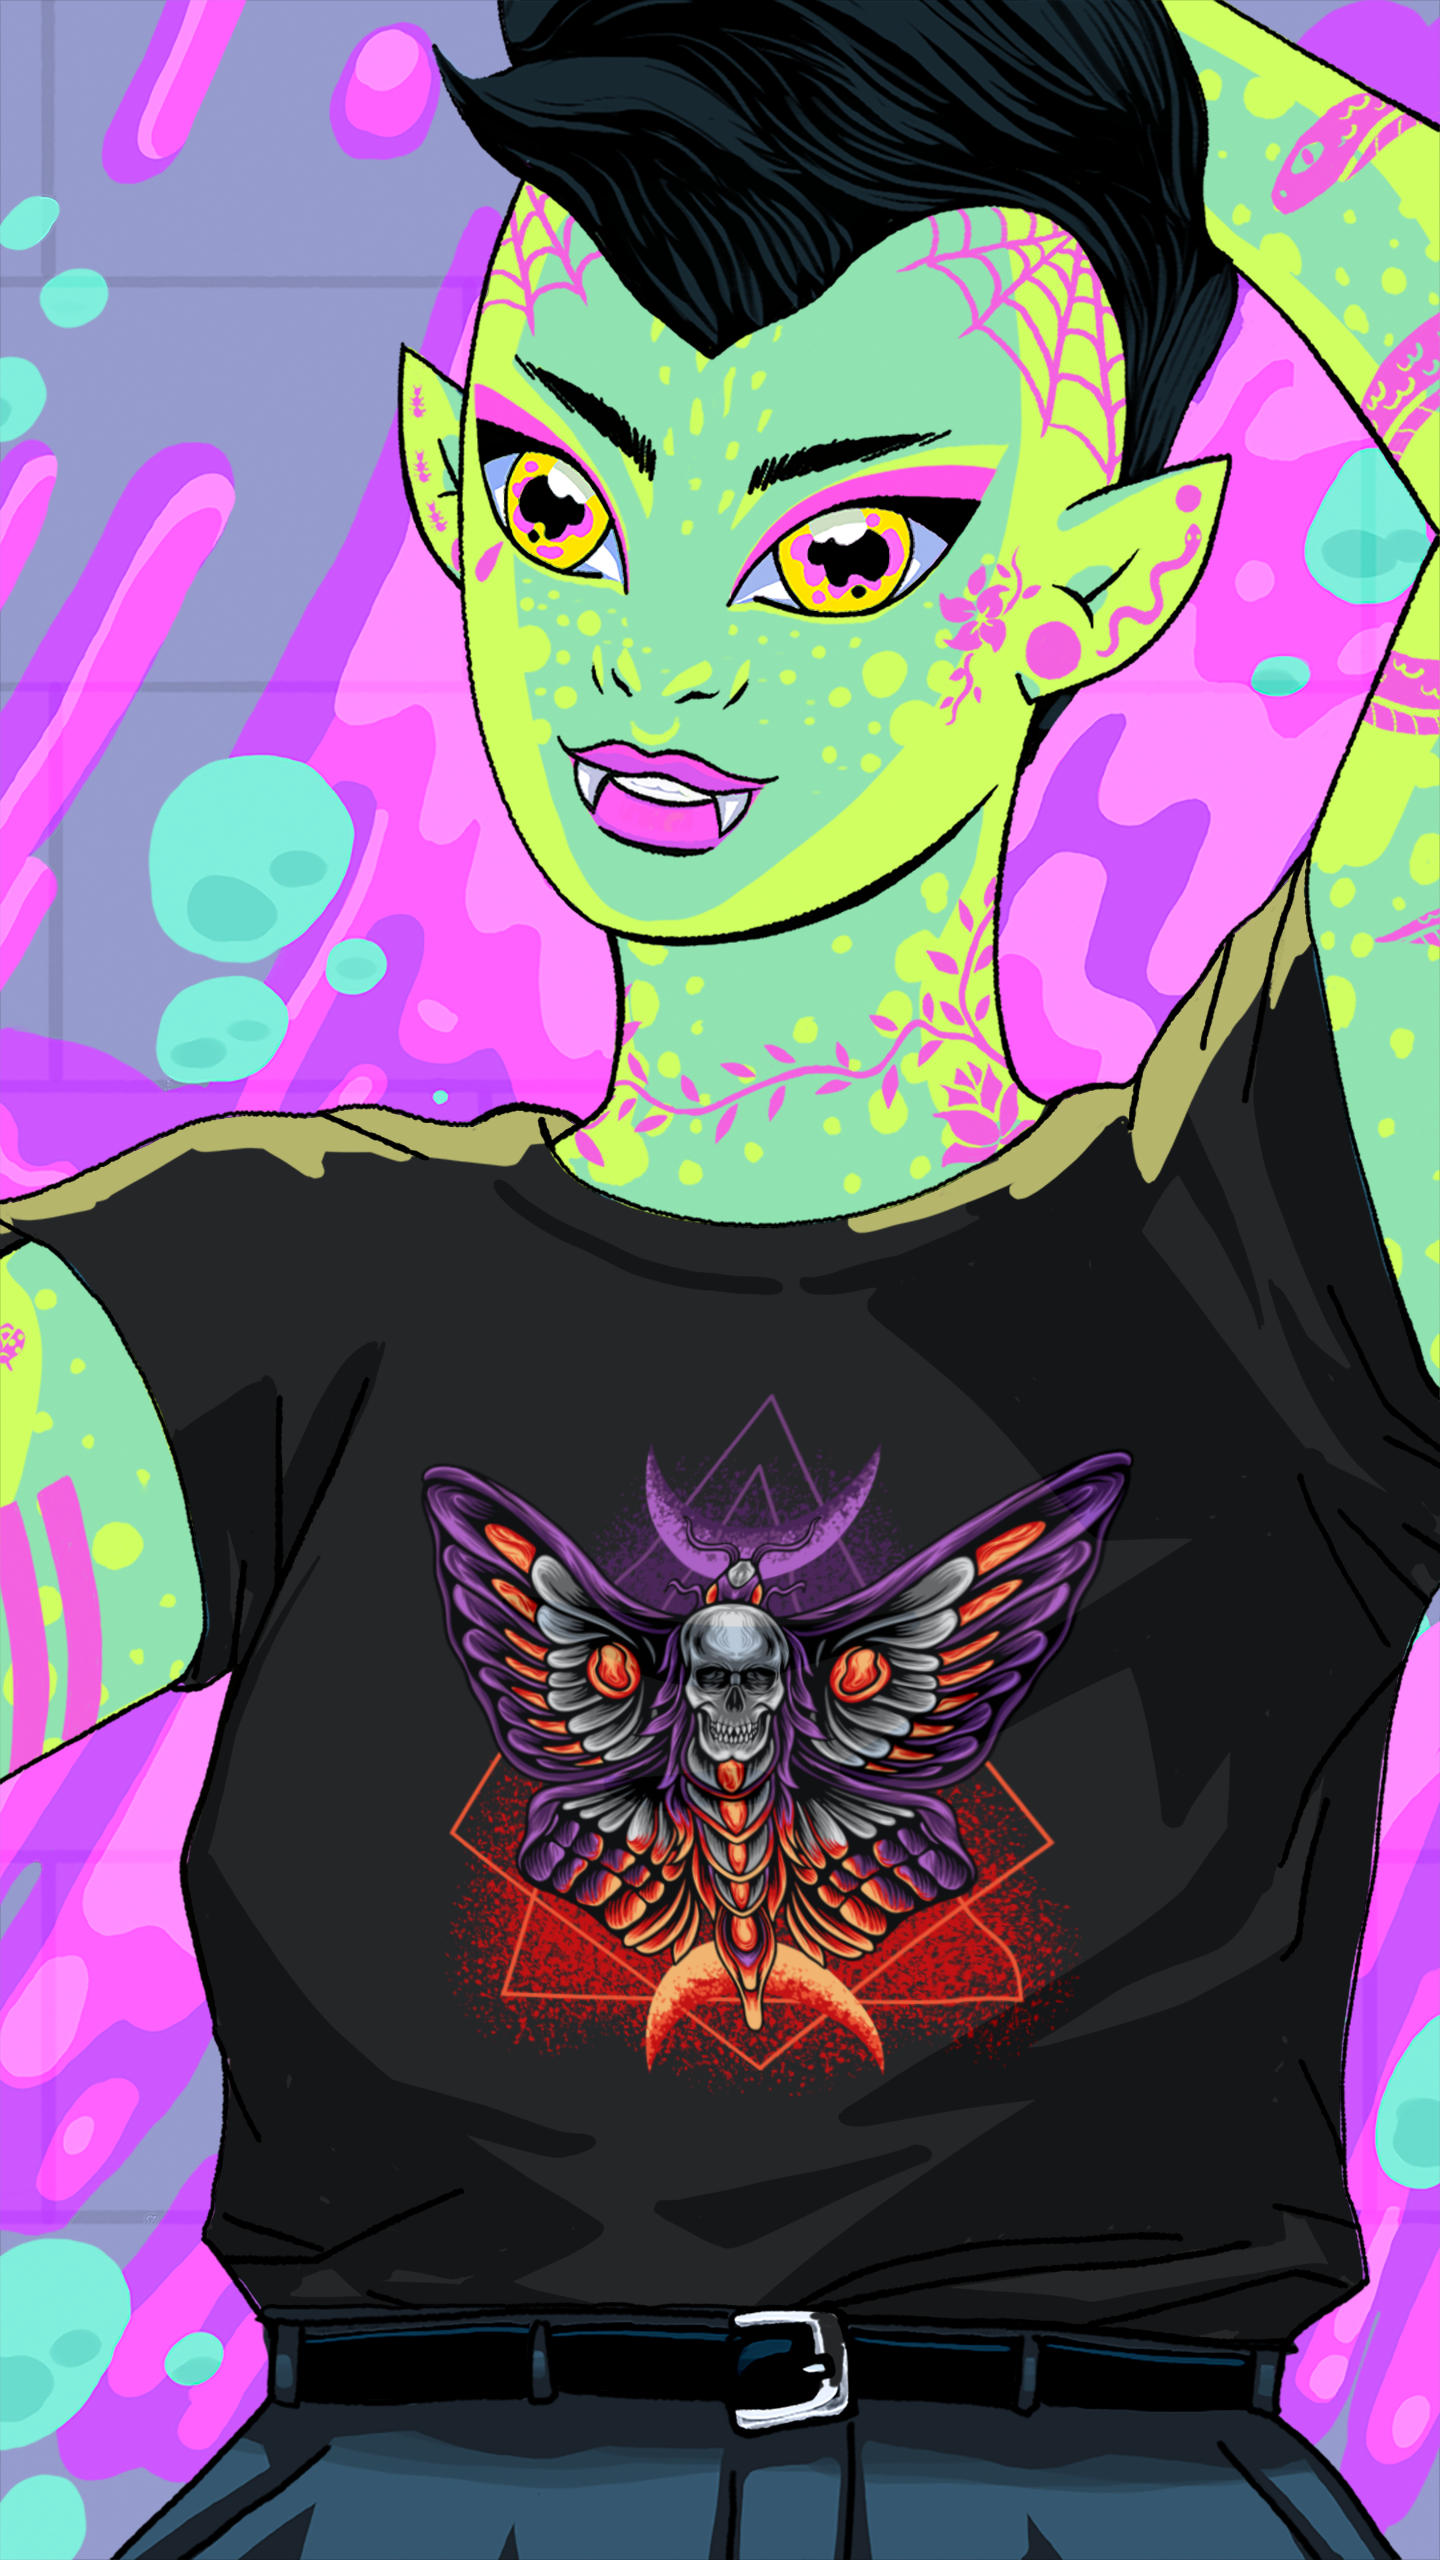 "Butterfly" Unisex T-Shirt by nasmore + FREE DOWNLOAD